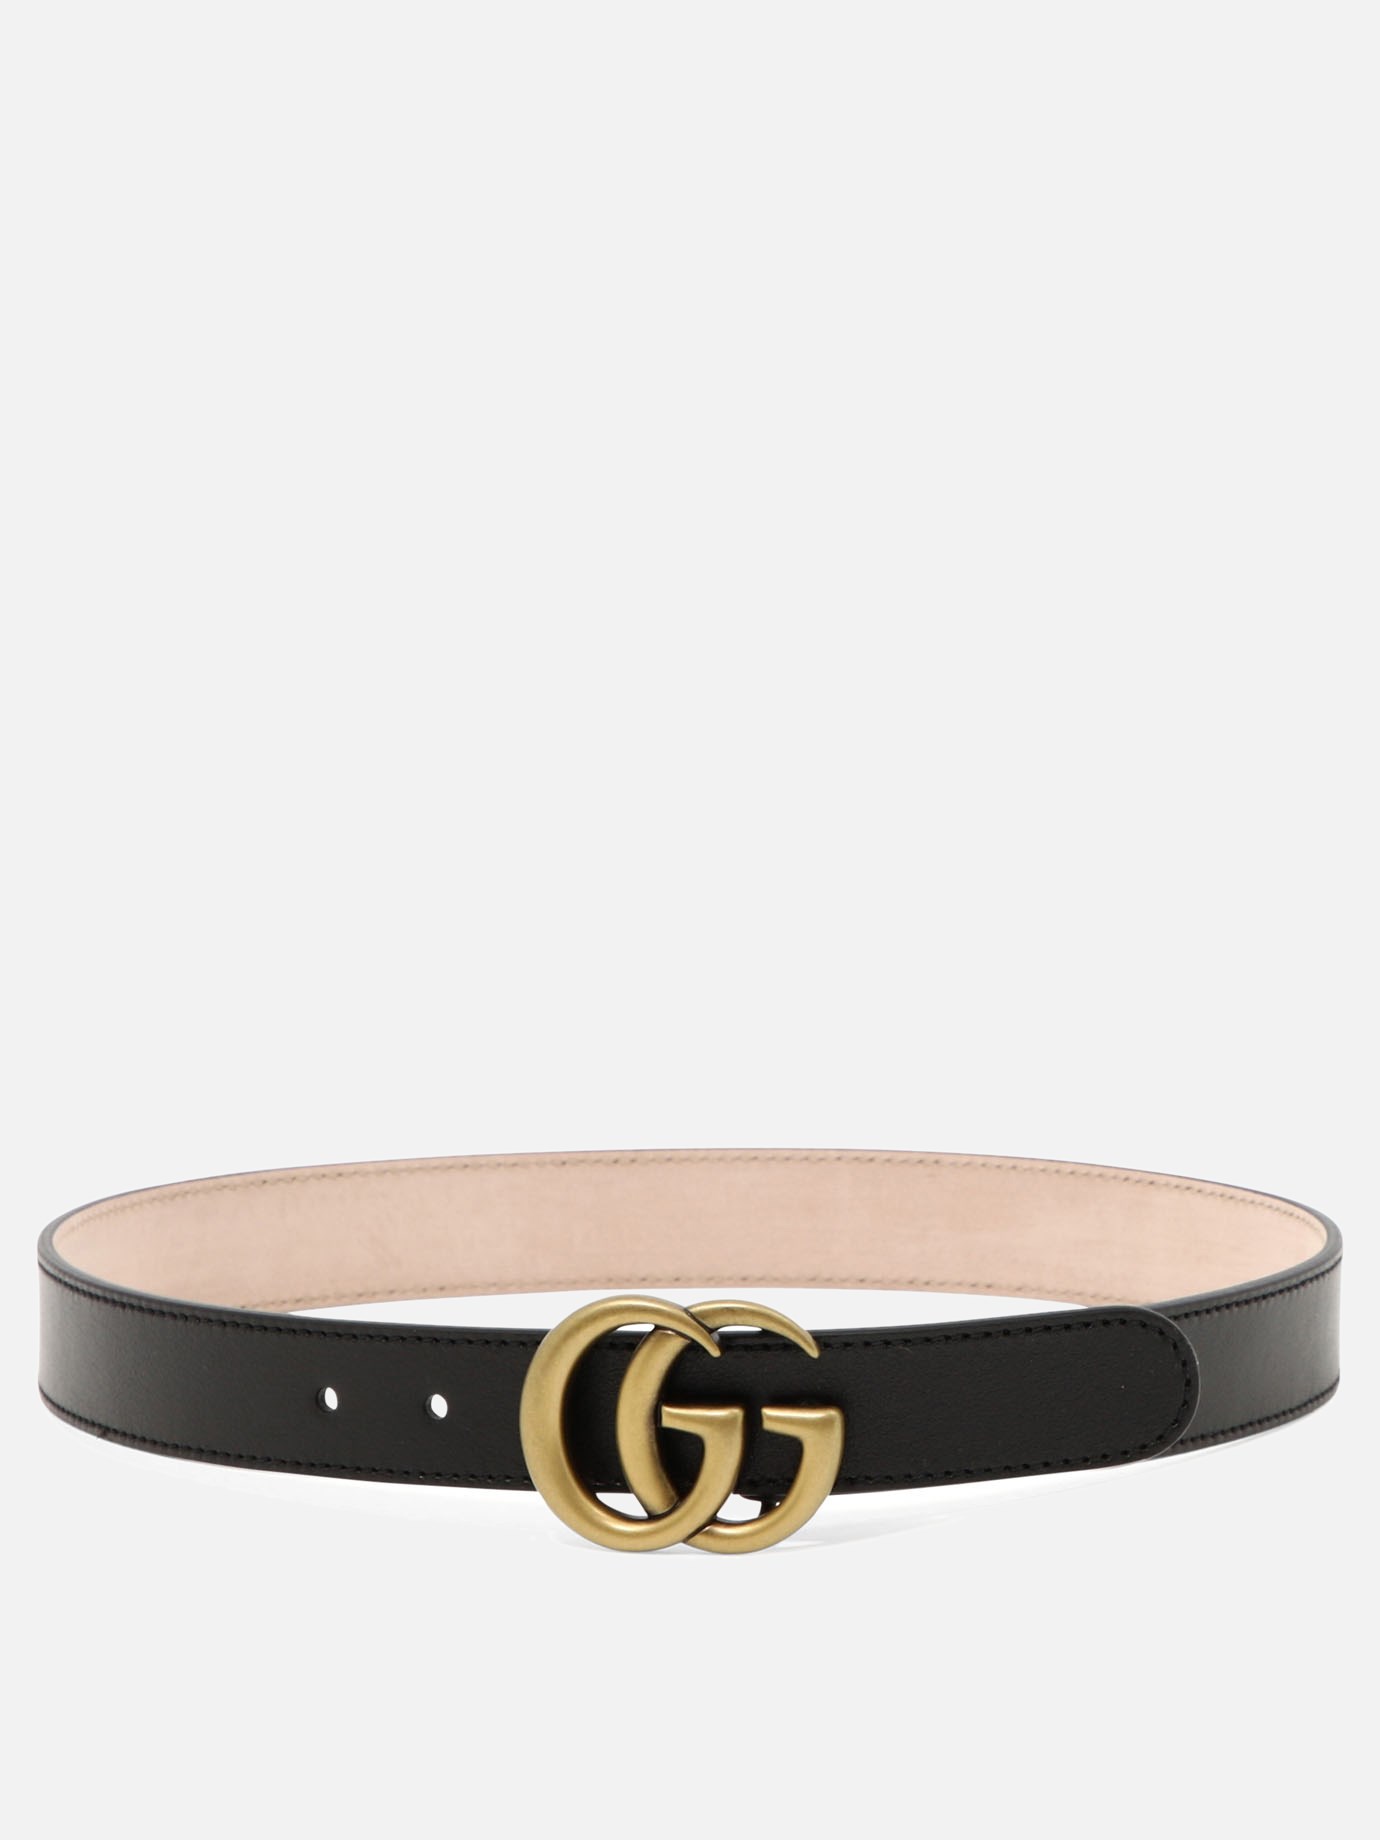  Double G  beltby Gucci Kids - 5